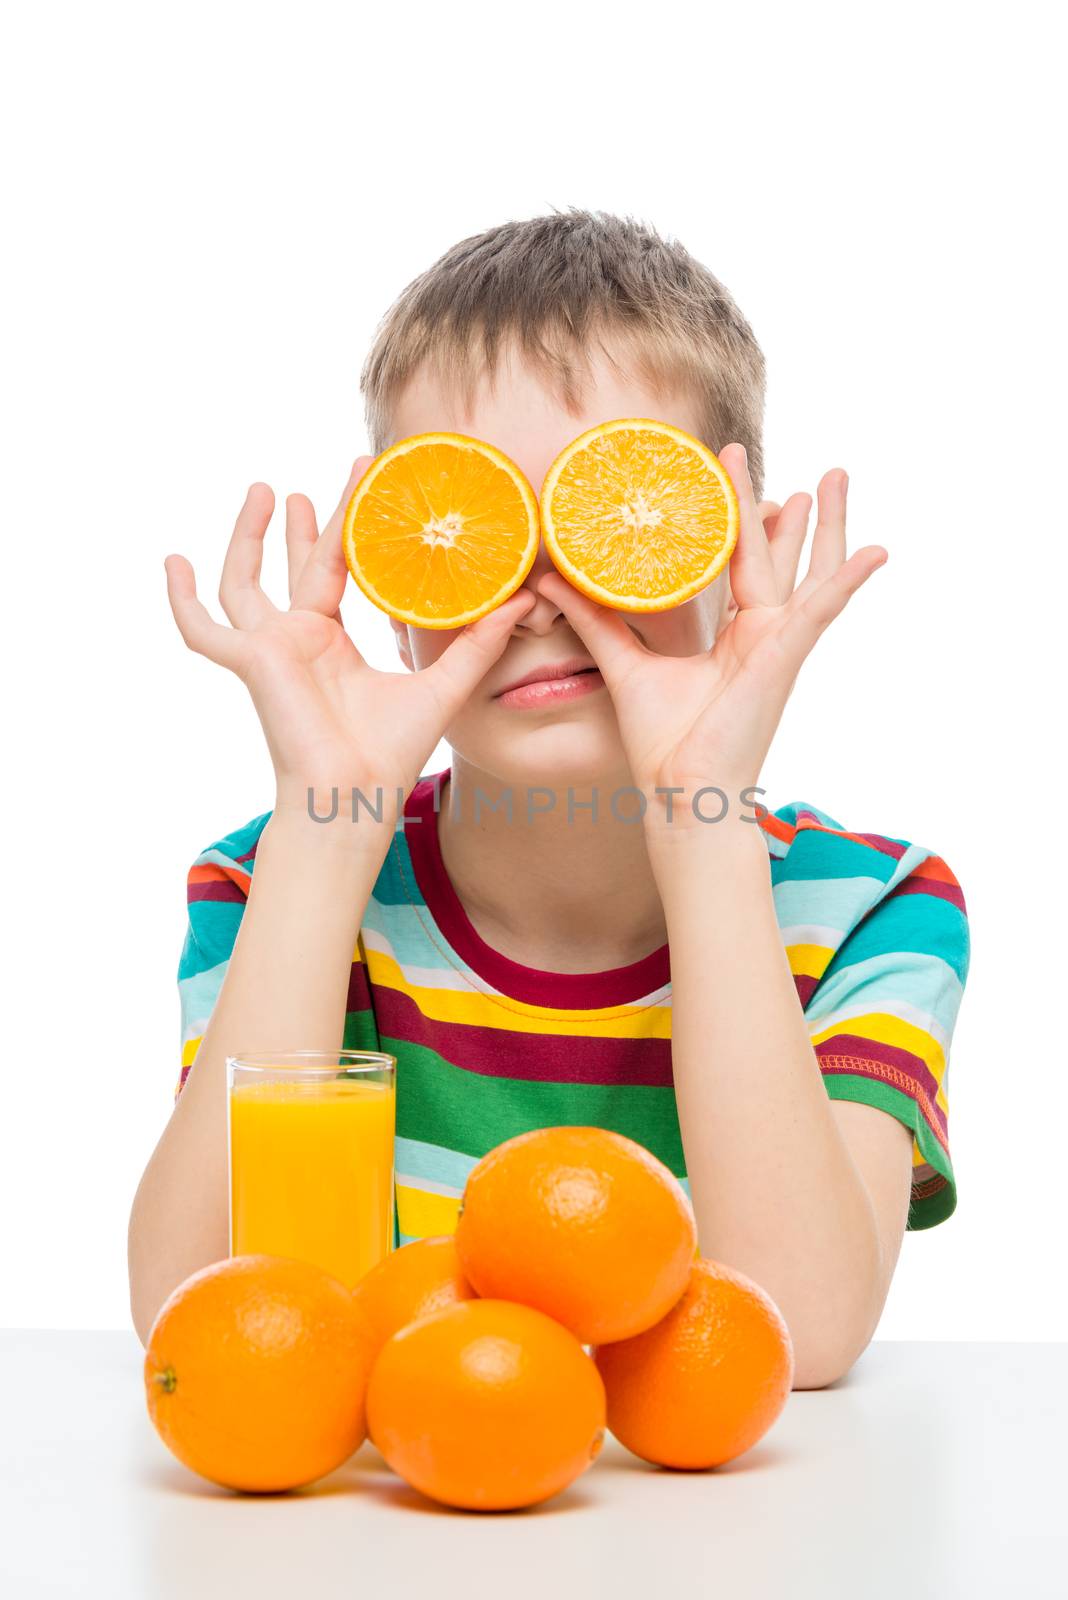 humorous photo of a boy with oranges and fresh juice on a white by kosmsos111